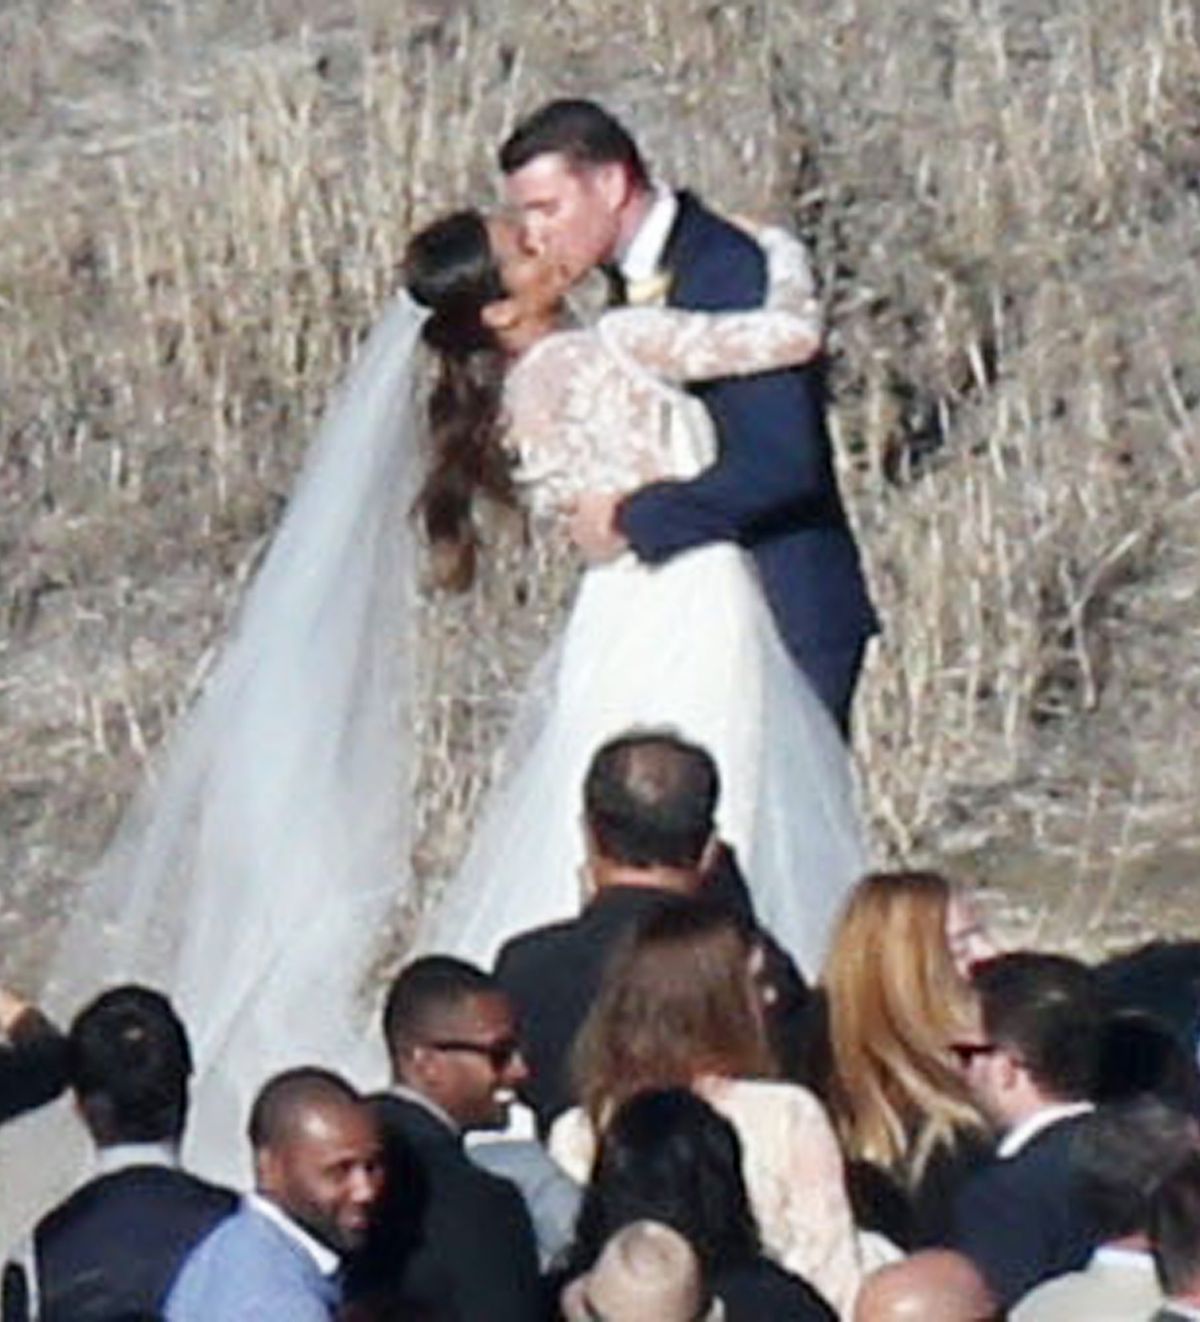 51895088 Actress Jamie Chung and Bryan Greenberg tie the knot on Halloween at El Capitan Canyon in Santa Barbara, California on October 31, 2015. The pair were surrounded by friends and family during the romantic secluded wedding. FameFlynet, Inc - Beverl